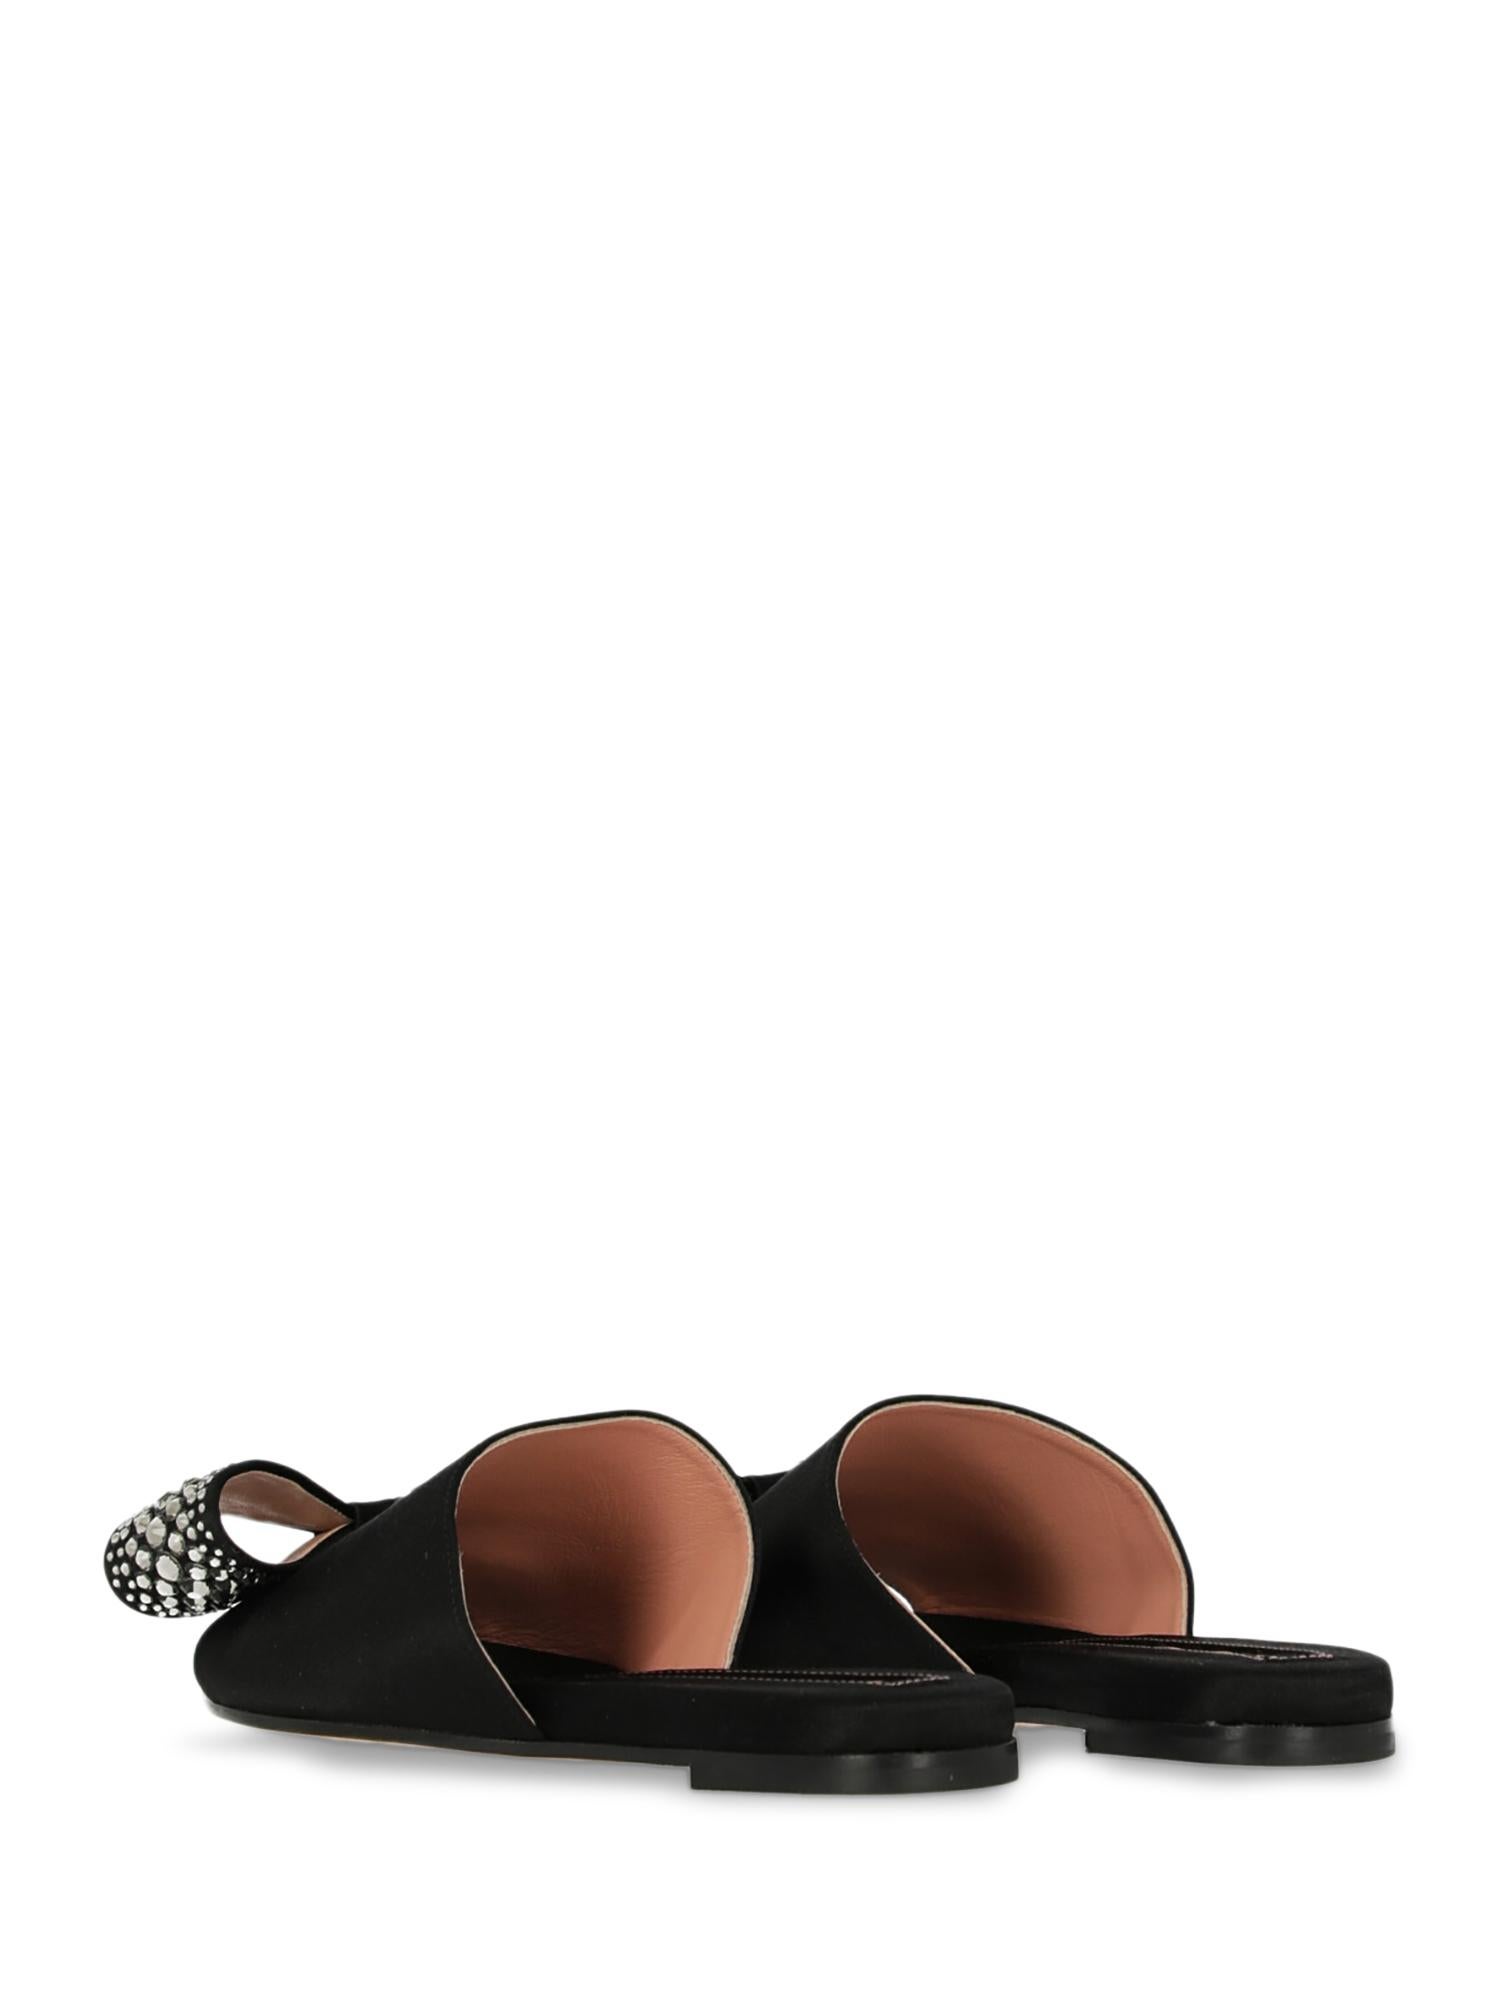 Rochas Woman Slippers Black EU 35 In Excellent Condition For Sale In Milan, IT